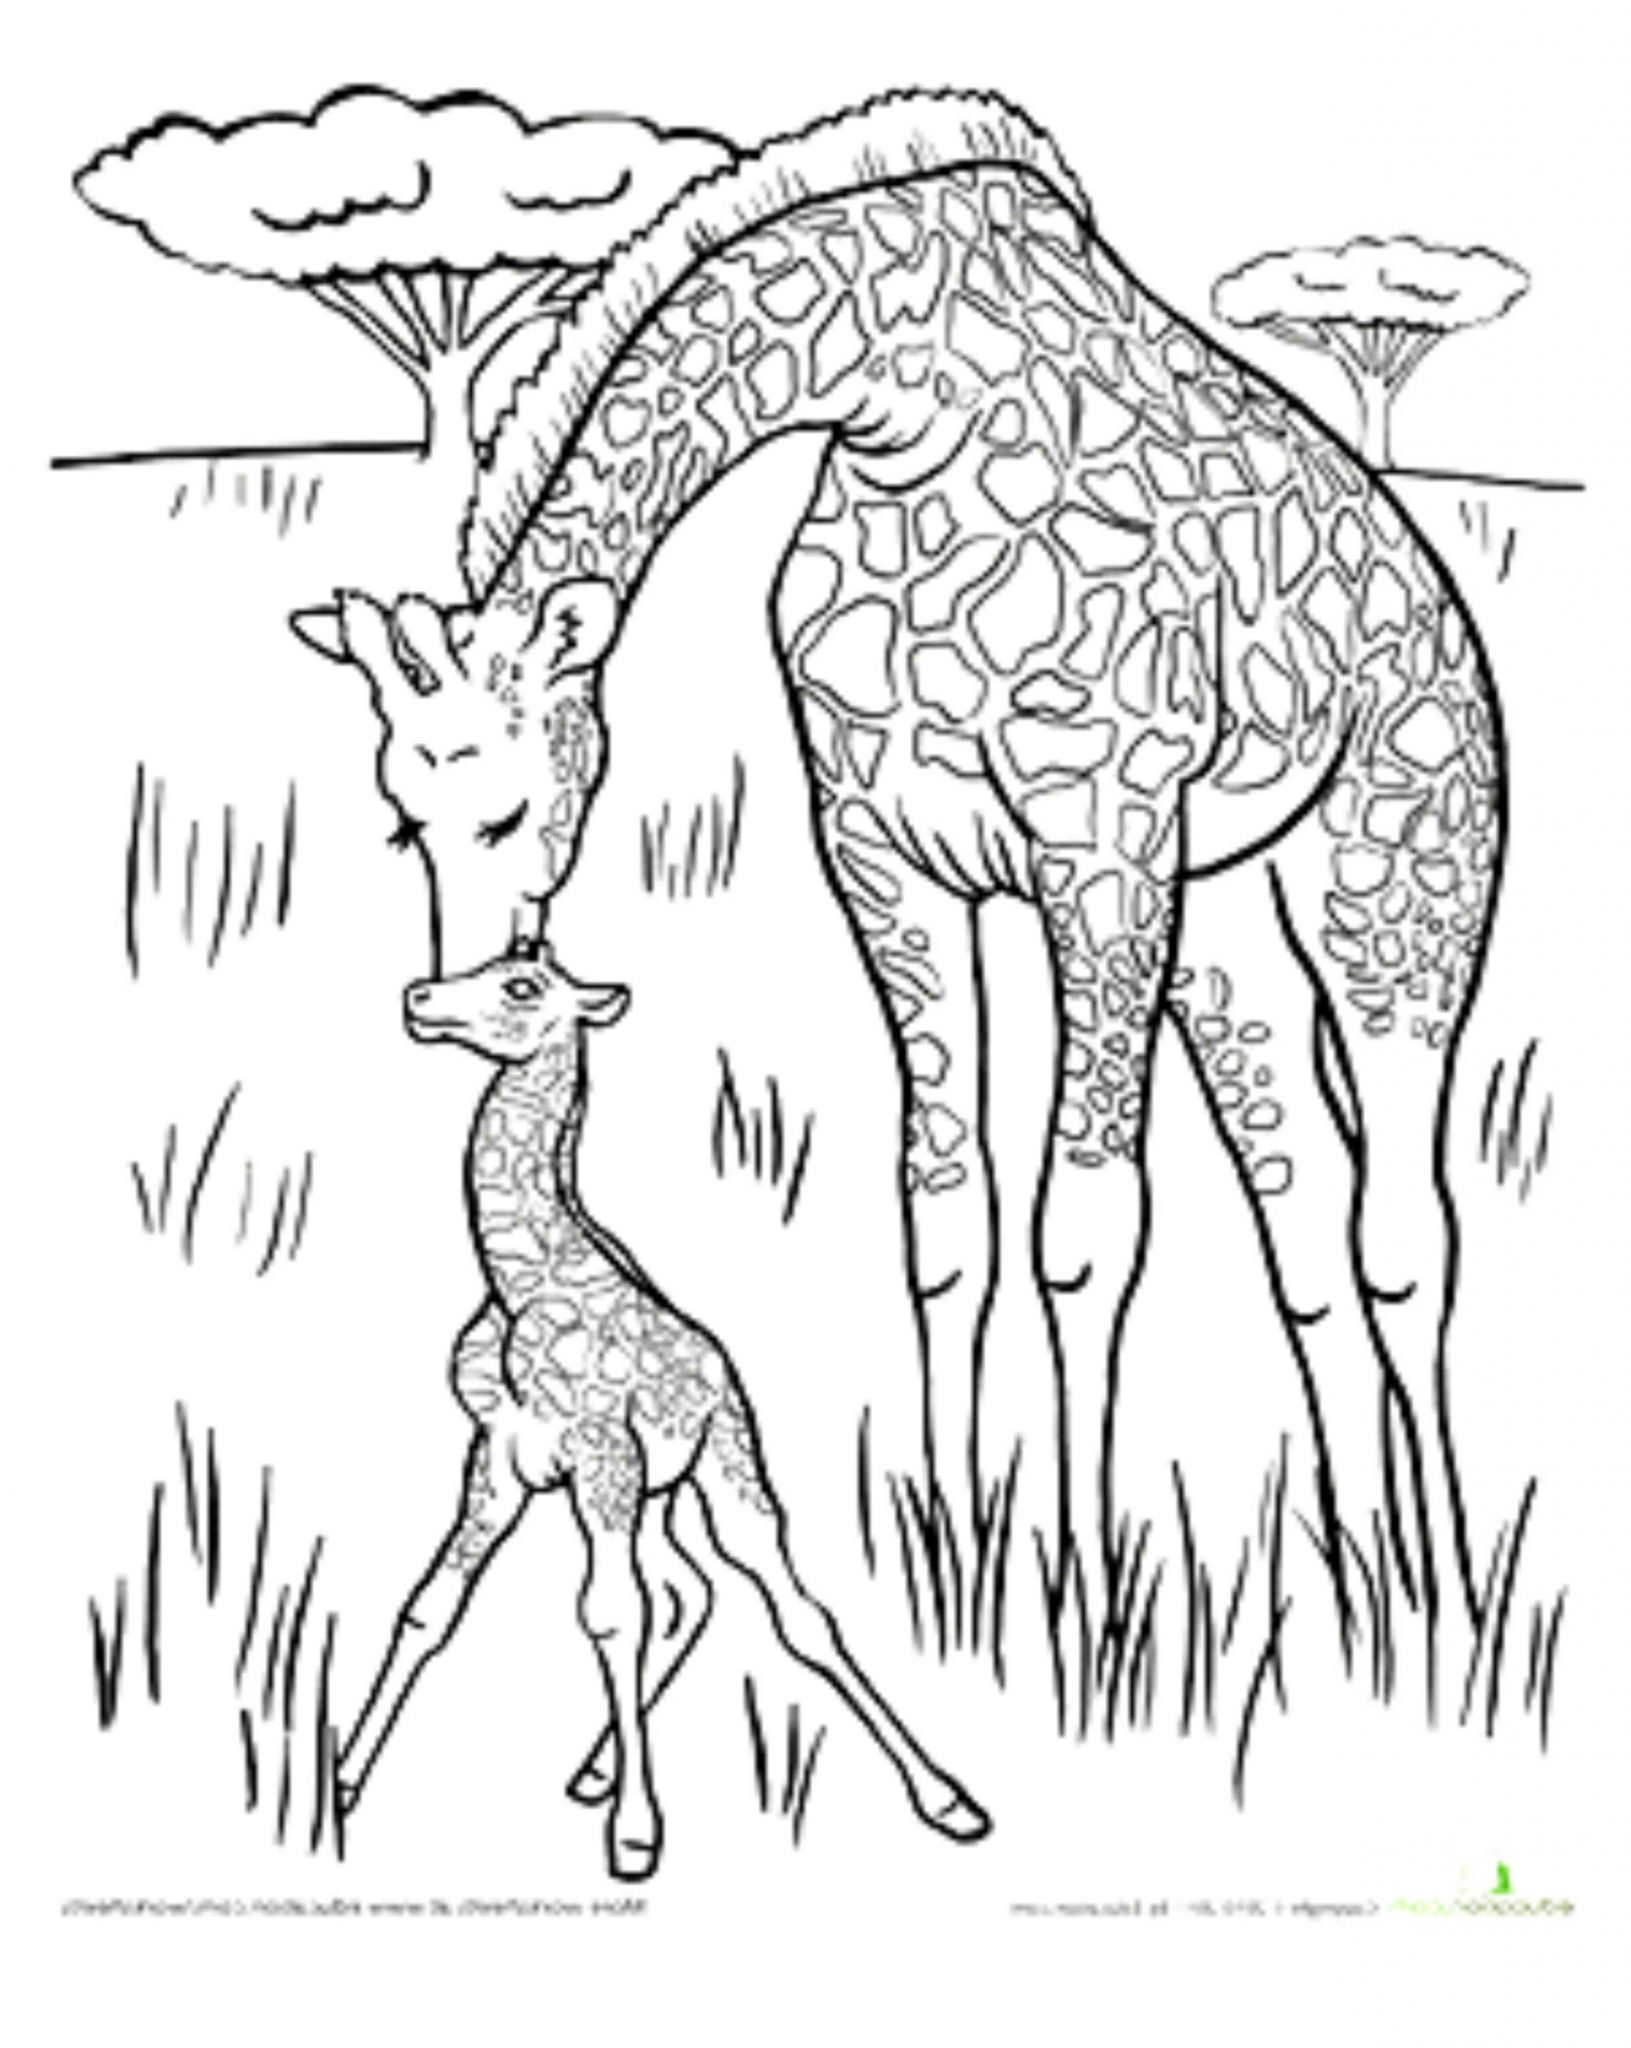 giraffe-coloring-pages-printable | | BestAppsForKids.com